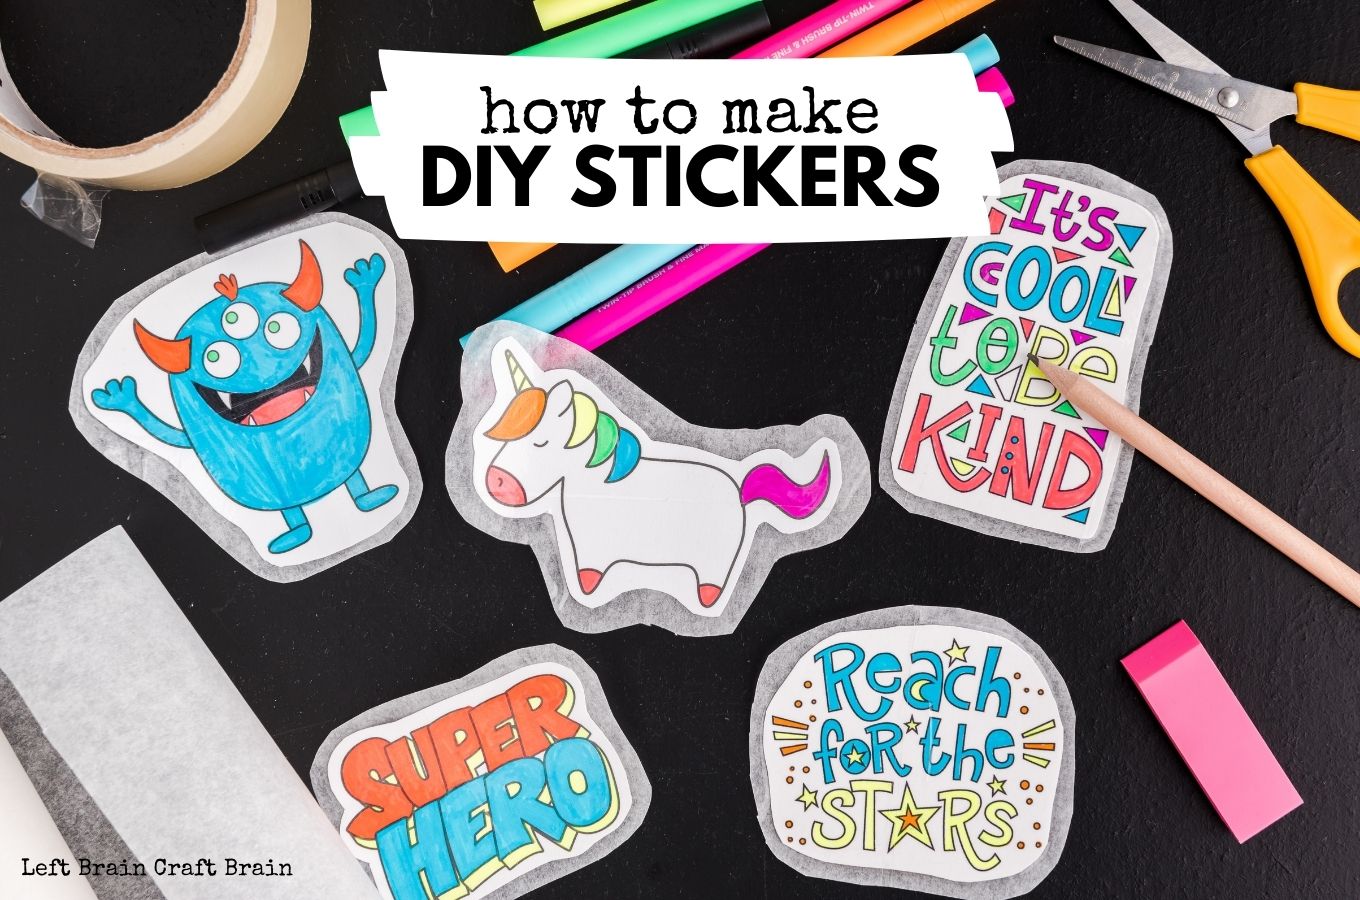 How to Make DIY Stickers 1360x900